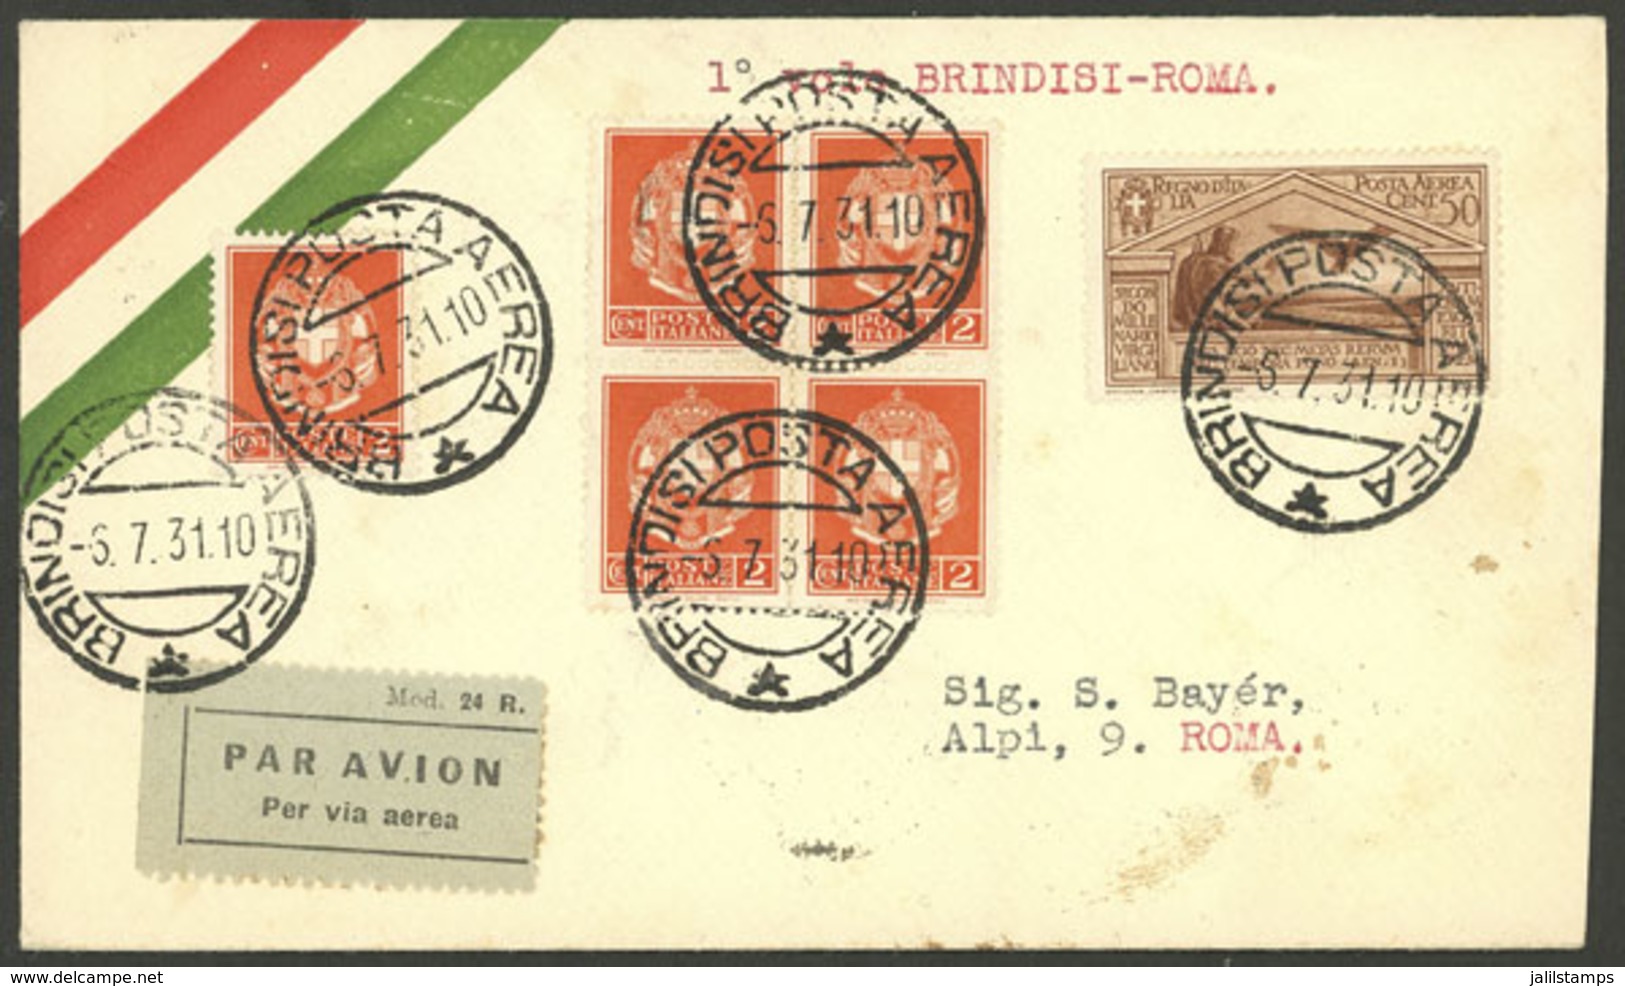 ITALY: 6/JUL/1931 Brindisi - Roma, First Flight, Cover Of VF Quality With Arrival Backstamp - Unclassified